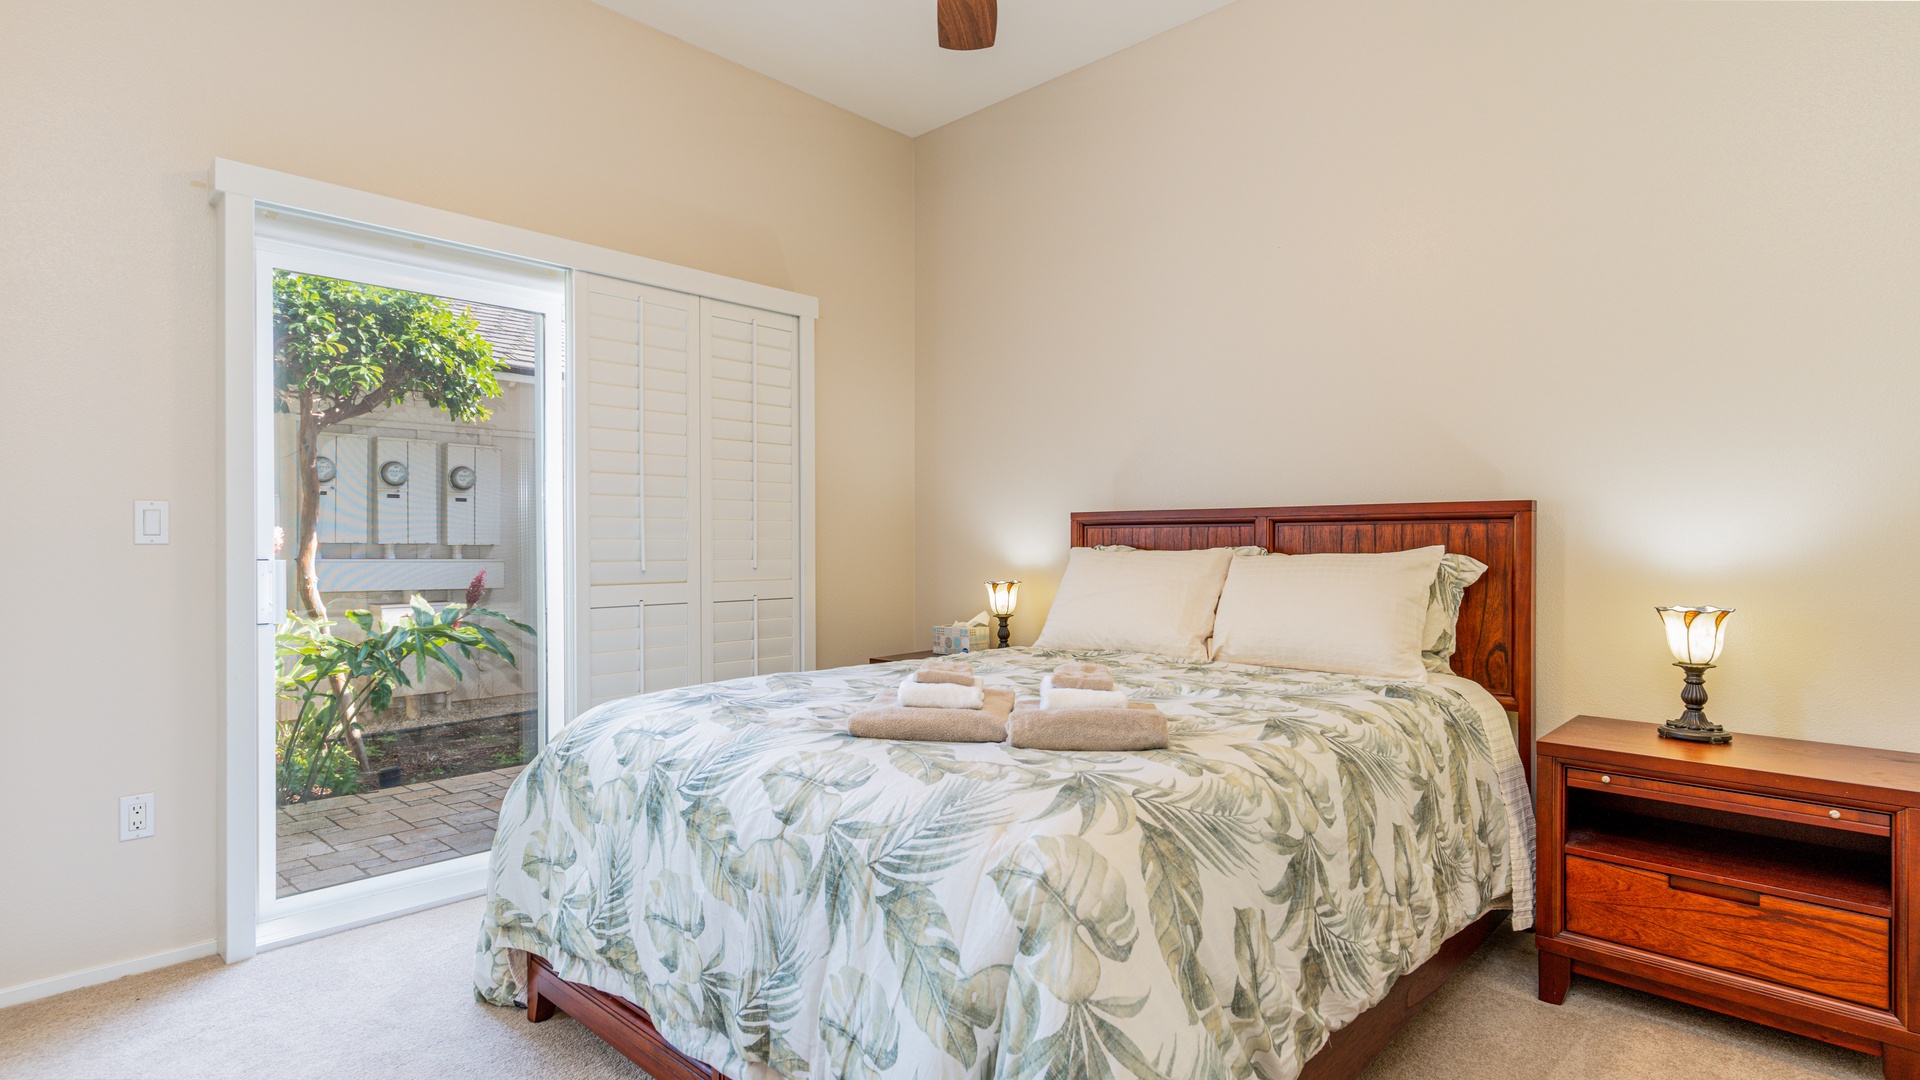 Kapolei Vacation Rentals, Coconut Plantation 1234-2 - The guest bedroom on the first floor has access to the private lanai.